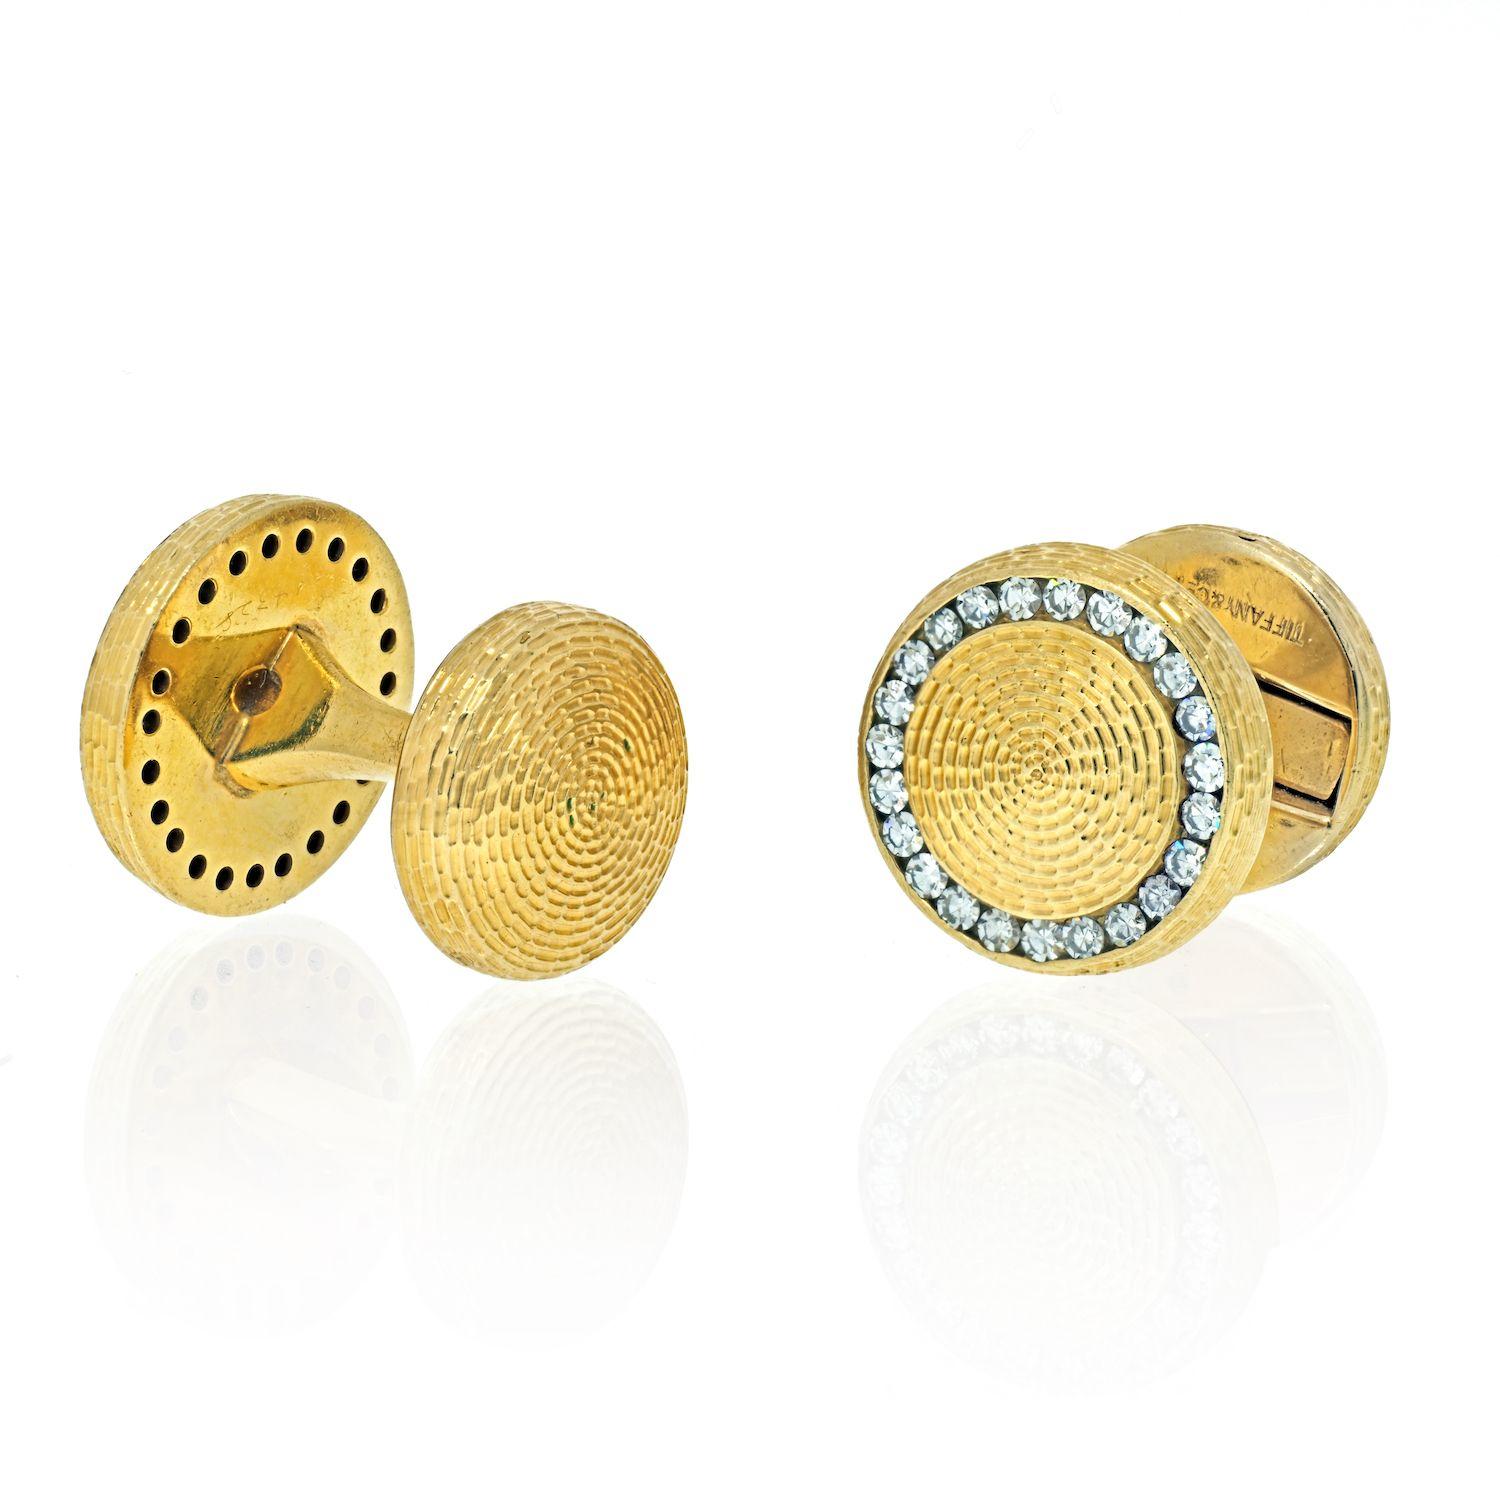 Tiffany & Co. Gold Diamond Cufflinks. 
Vintage 14K textured yellow gold Tiffany diamond cufflinks. These glamorous cufflinks are set with round brilliant diamond by the Iconic Tiffany & Co. circa 1950's. Approximate Measurements: Length 0.7